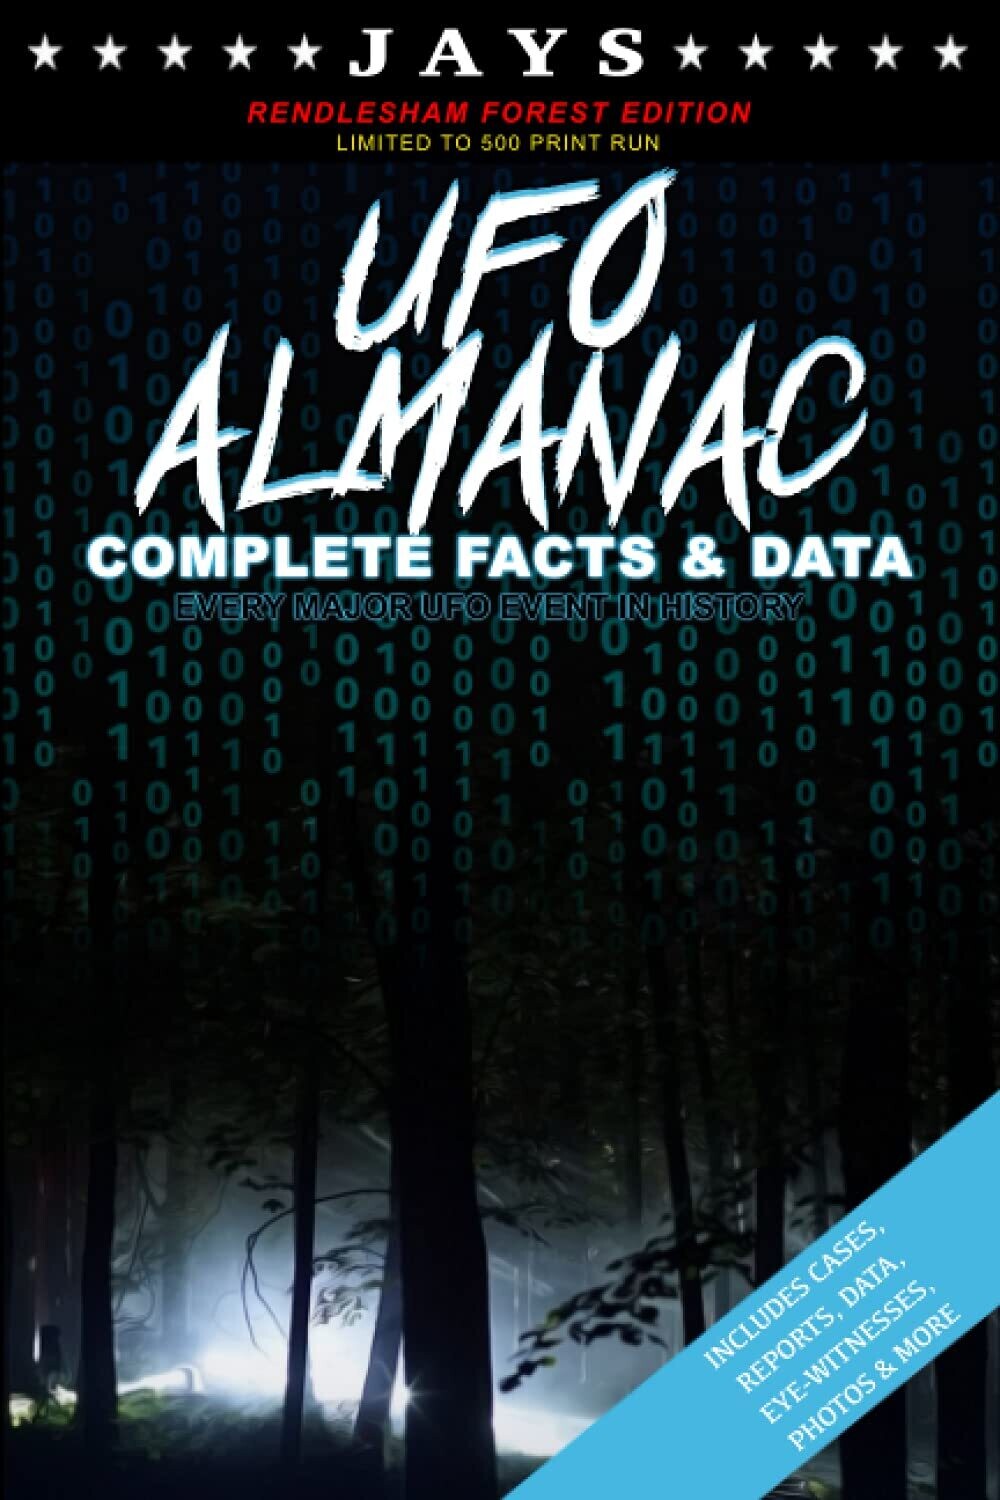 Jays UFO Almanac [#8 RENDLESHAM FOREST EDITION - LIMITED TO 500 PRINT RUN] Complete Facts & Data - Every Major UFO Case in History